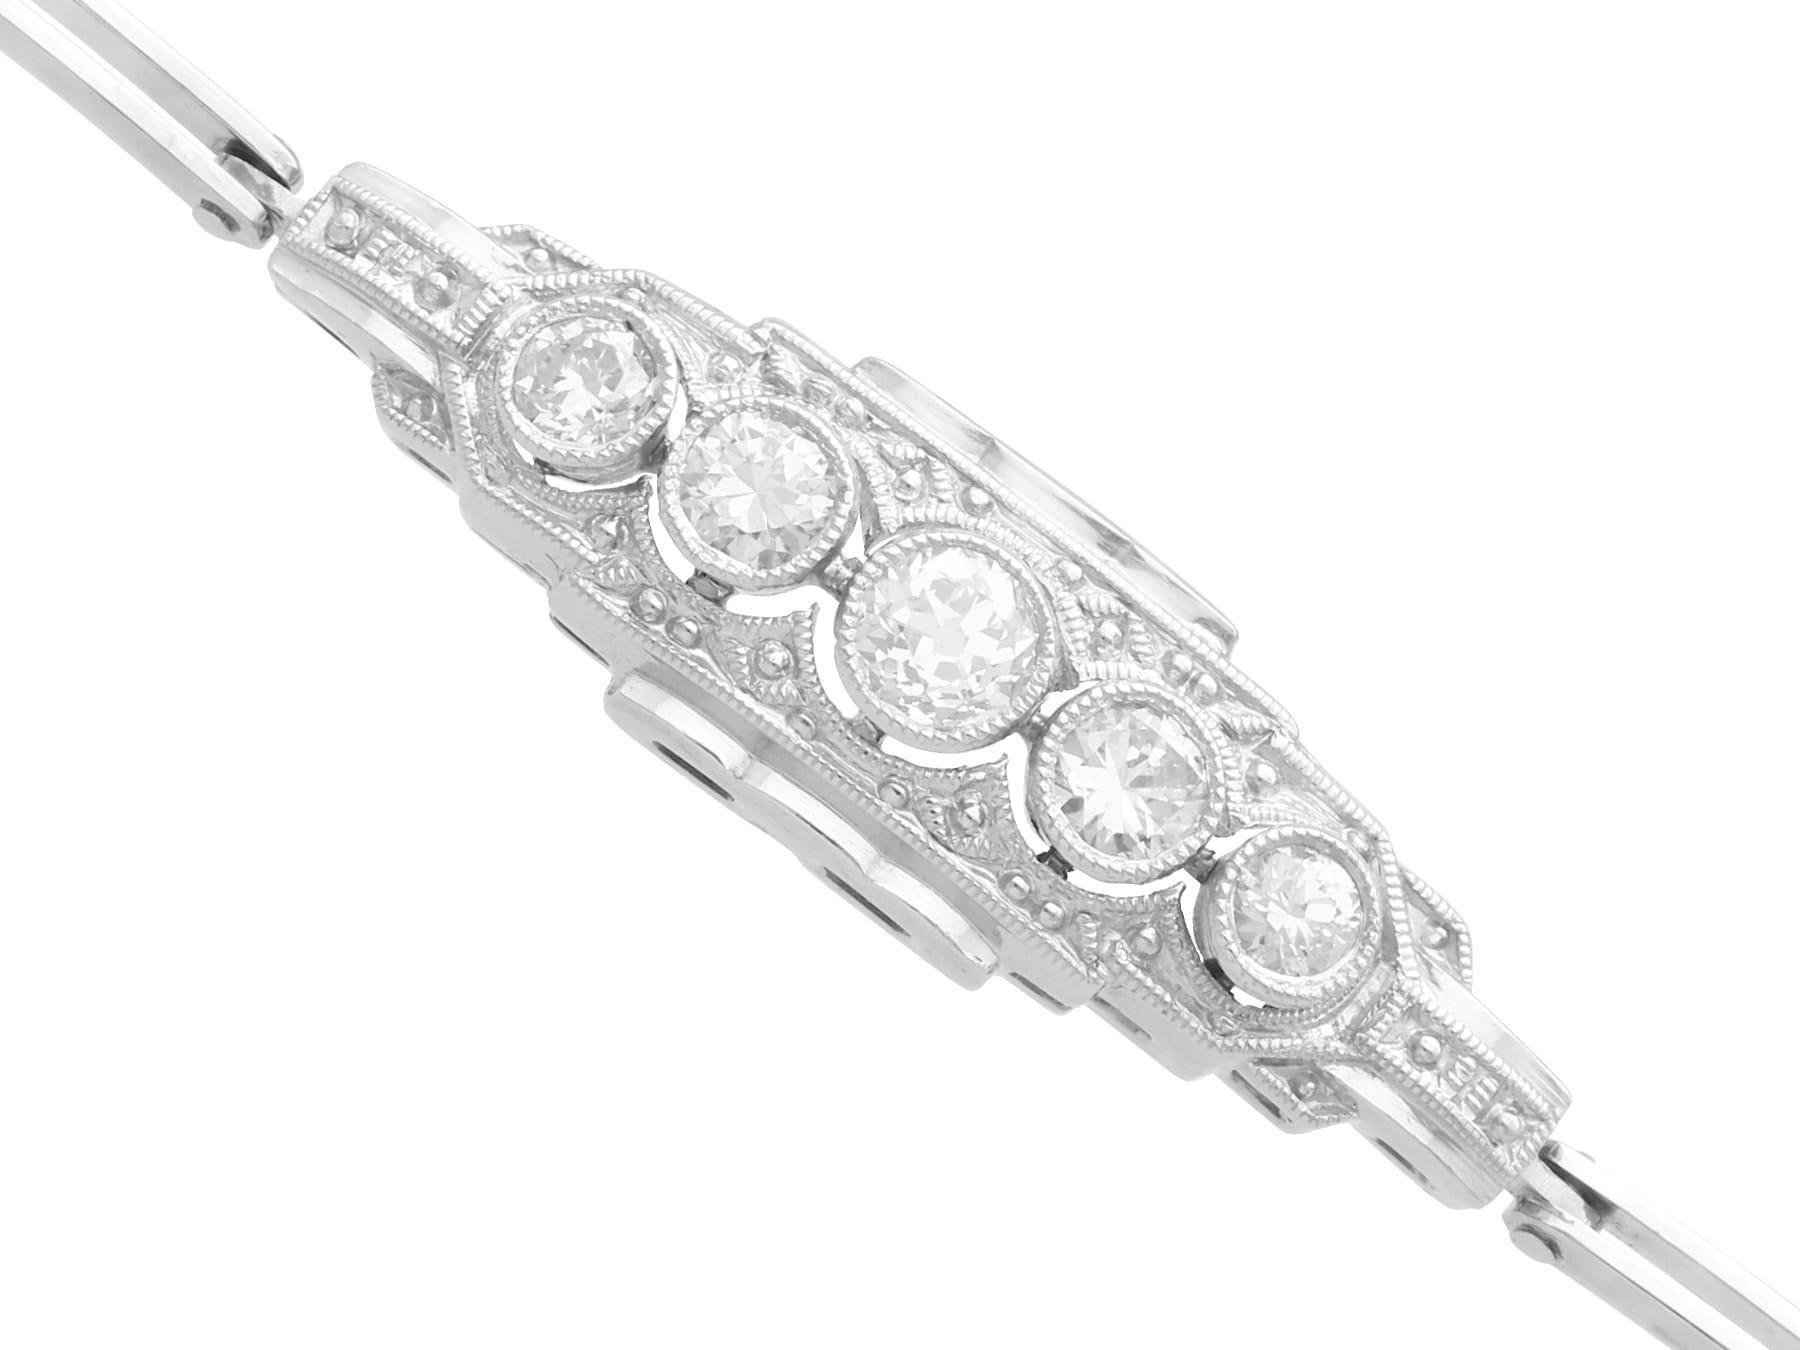 1920s Art Deco 0.44 Carat Diamond and 14k White Gold Bracelet In Excellent Condition For Sale In Jesmond, Newcastle Upon Tyne